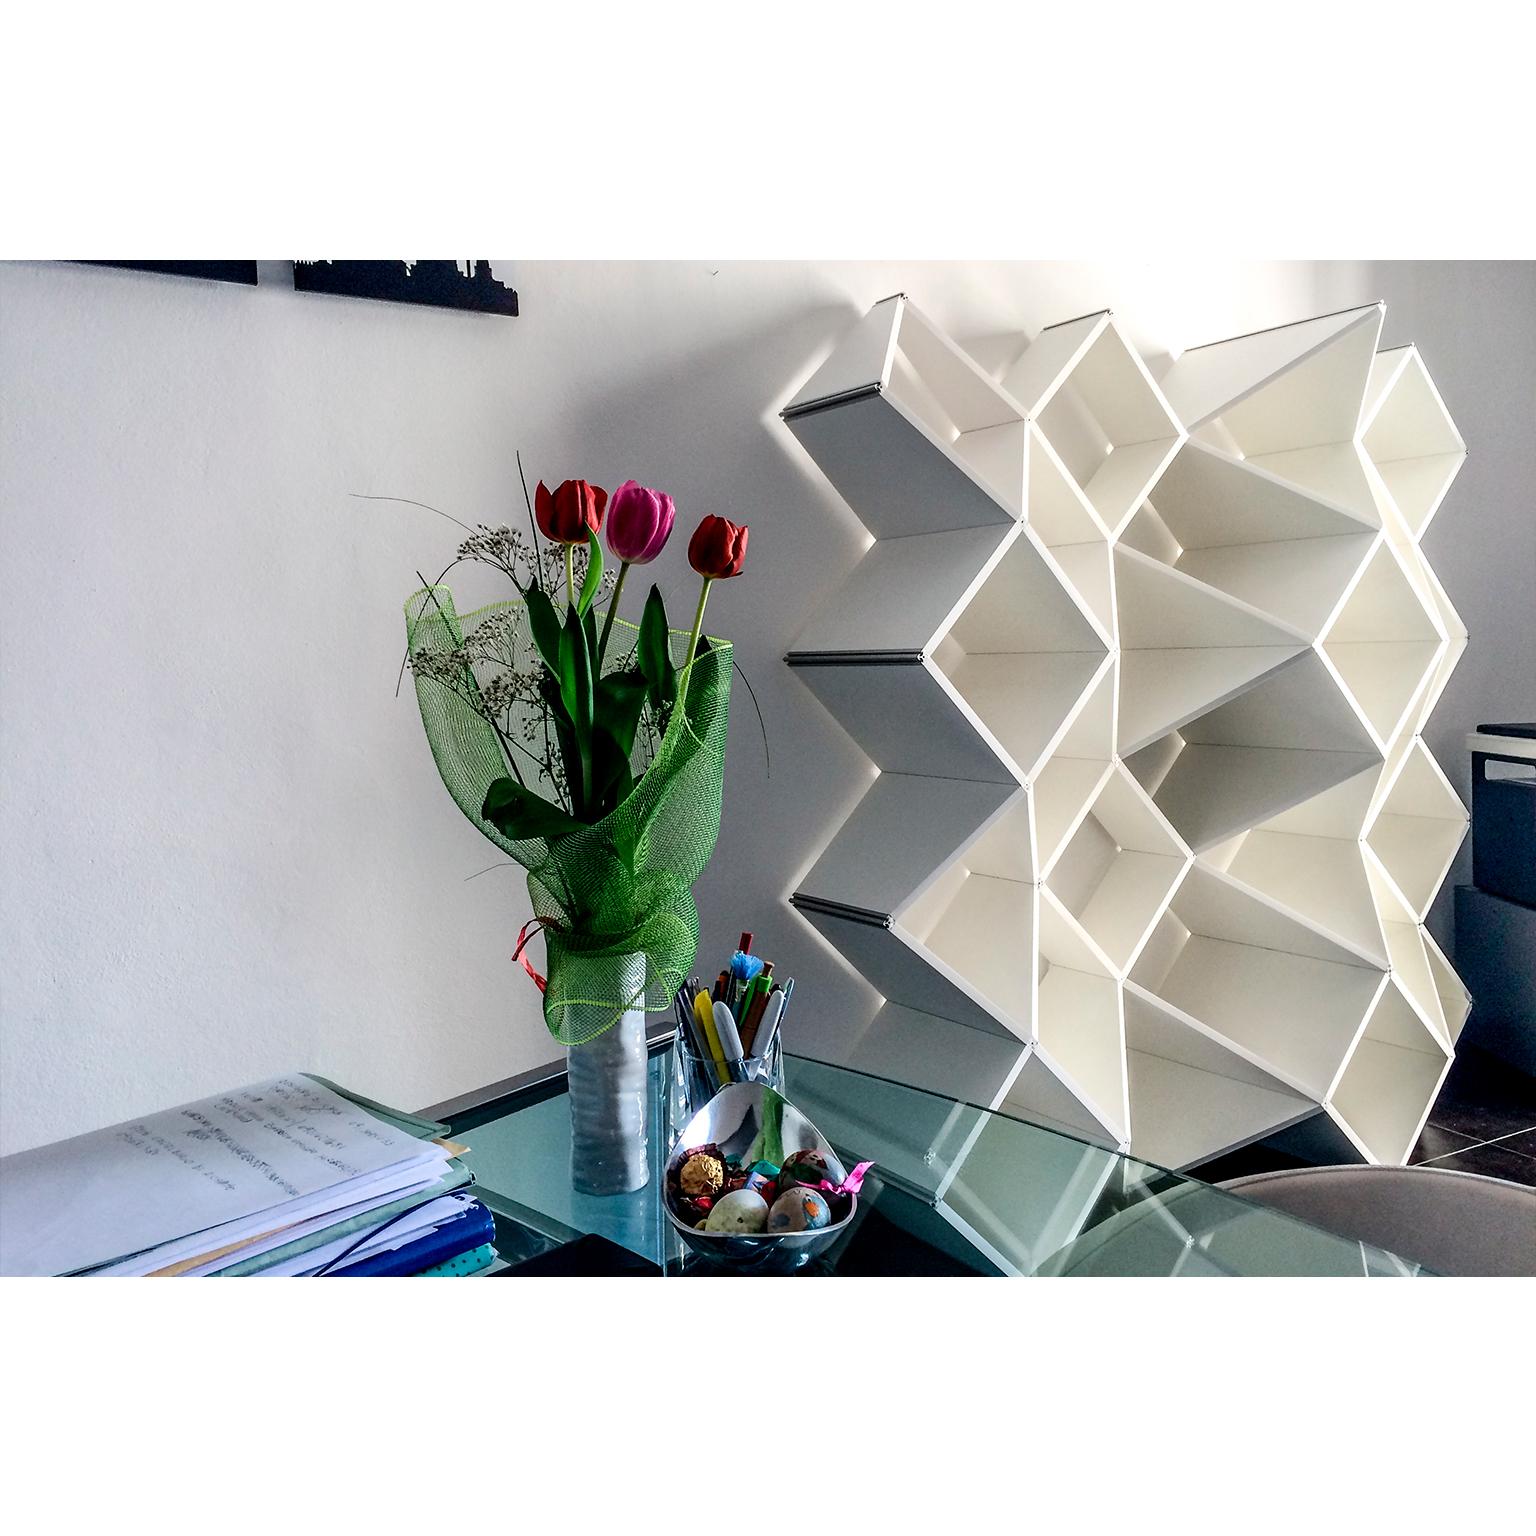 Anodized Modern Bookcase in Pvc Foam and Extruded Aluminum, X.me 4x4 #02 For Sale